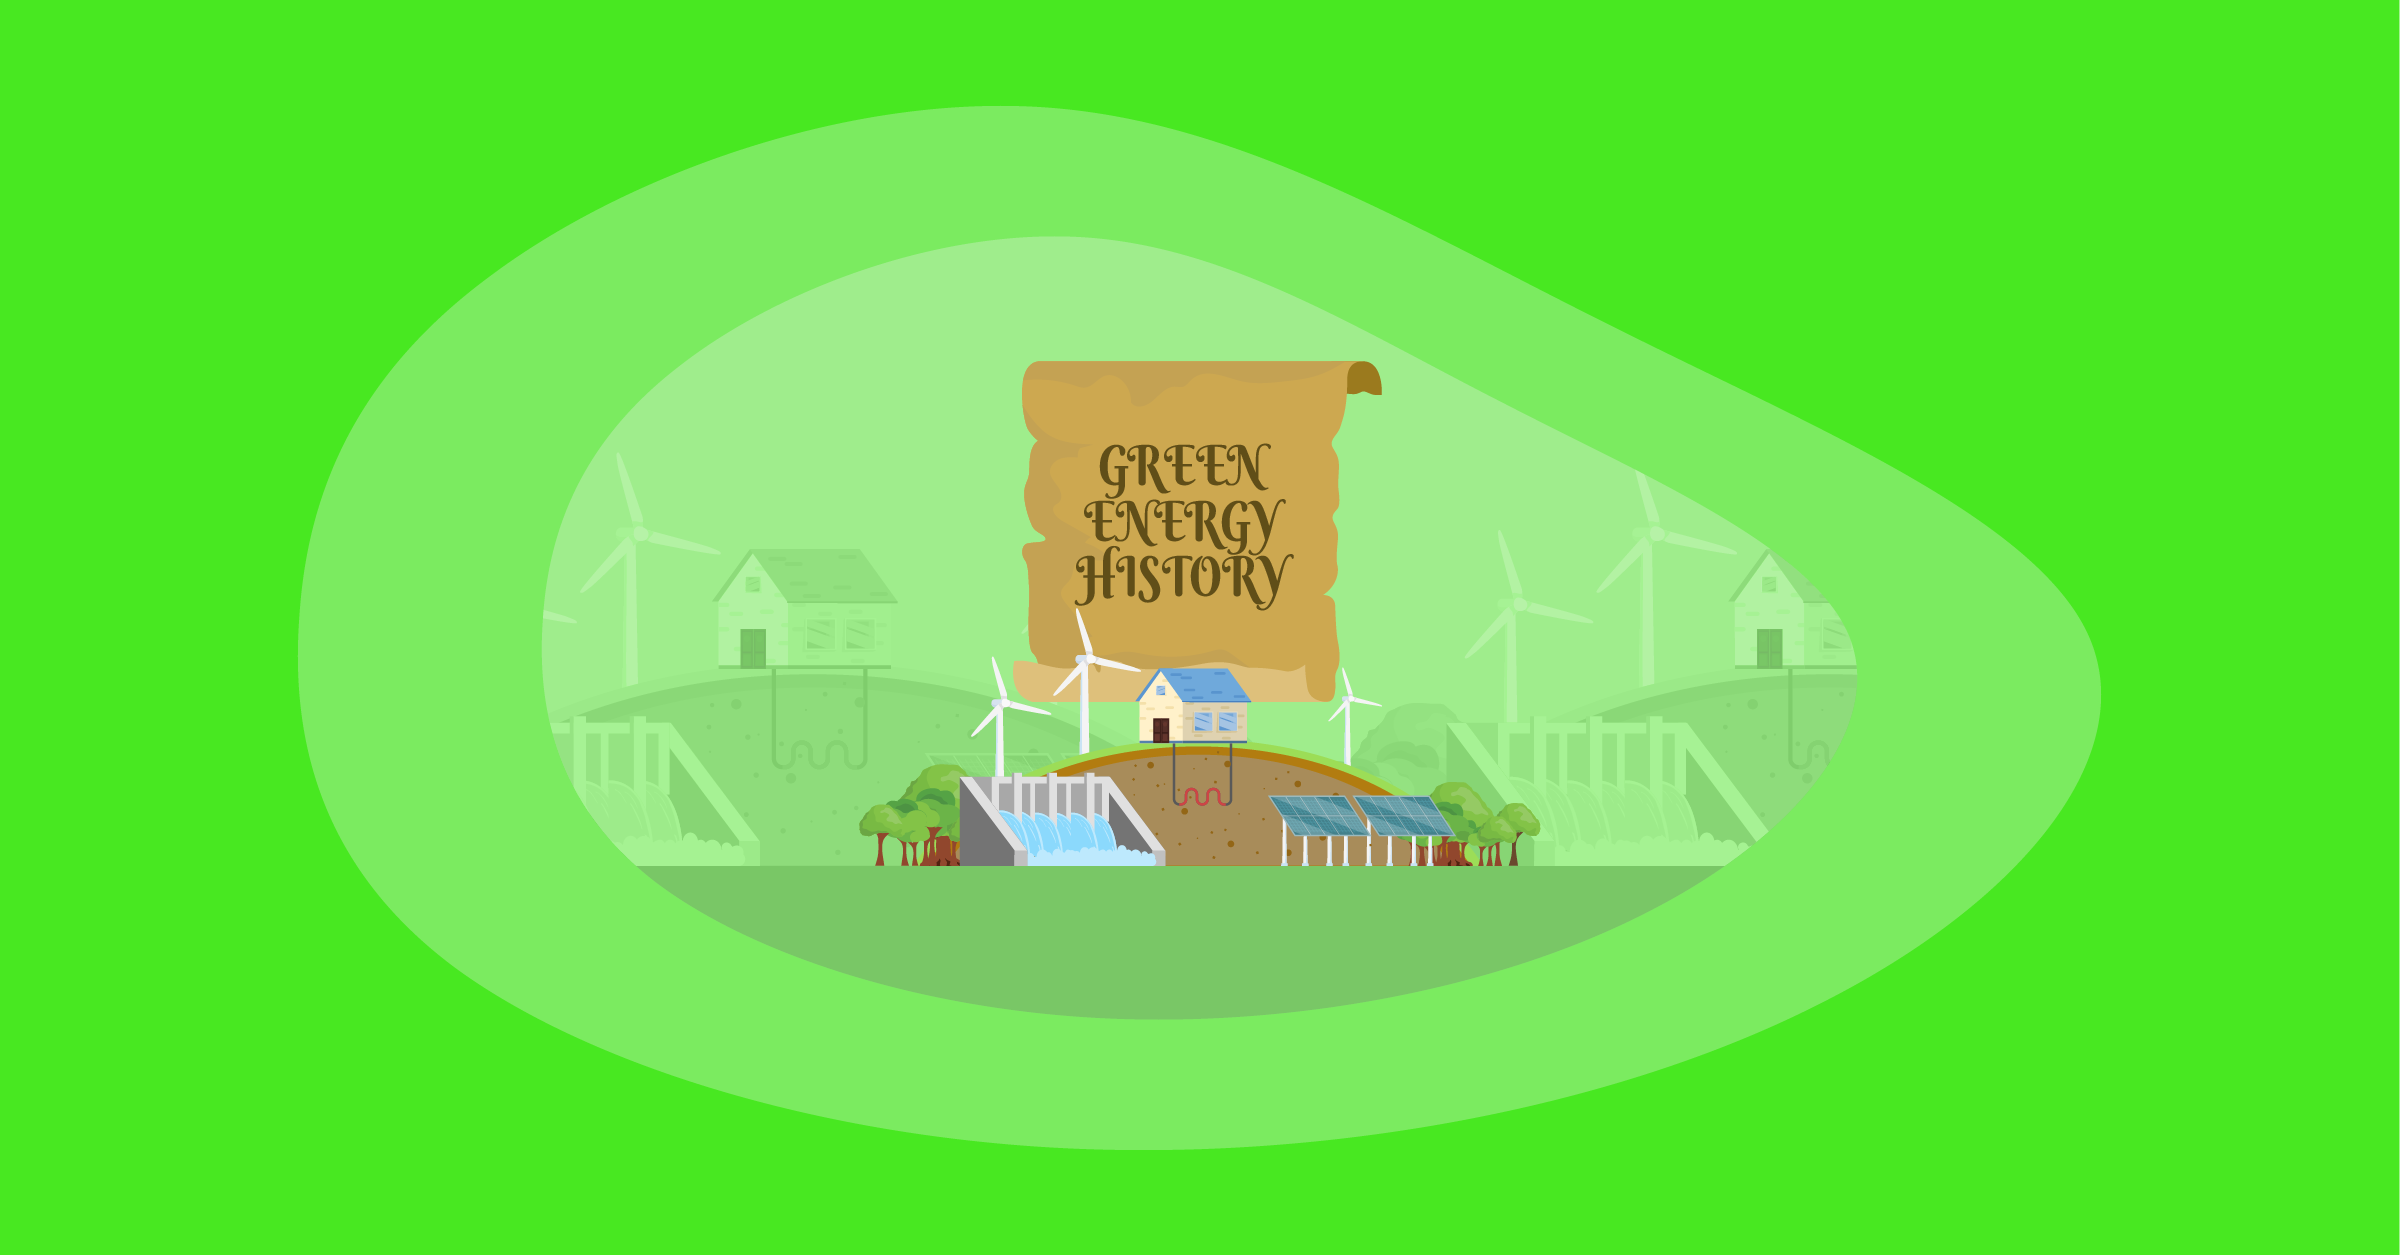 Illustration of green energy and its history